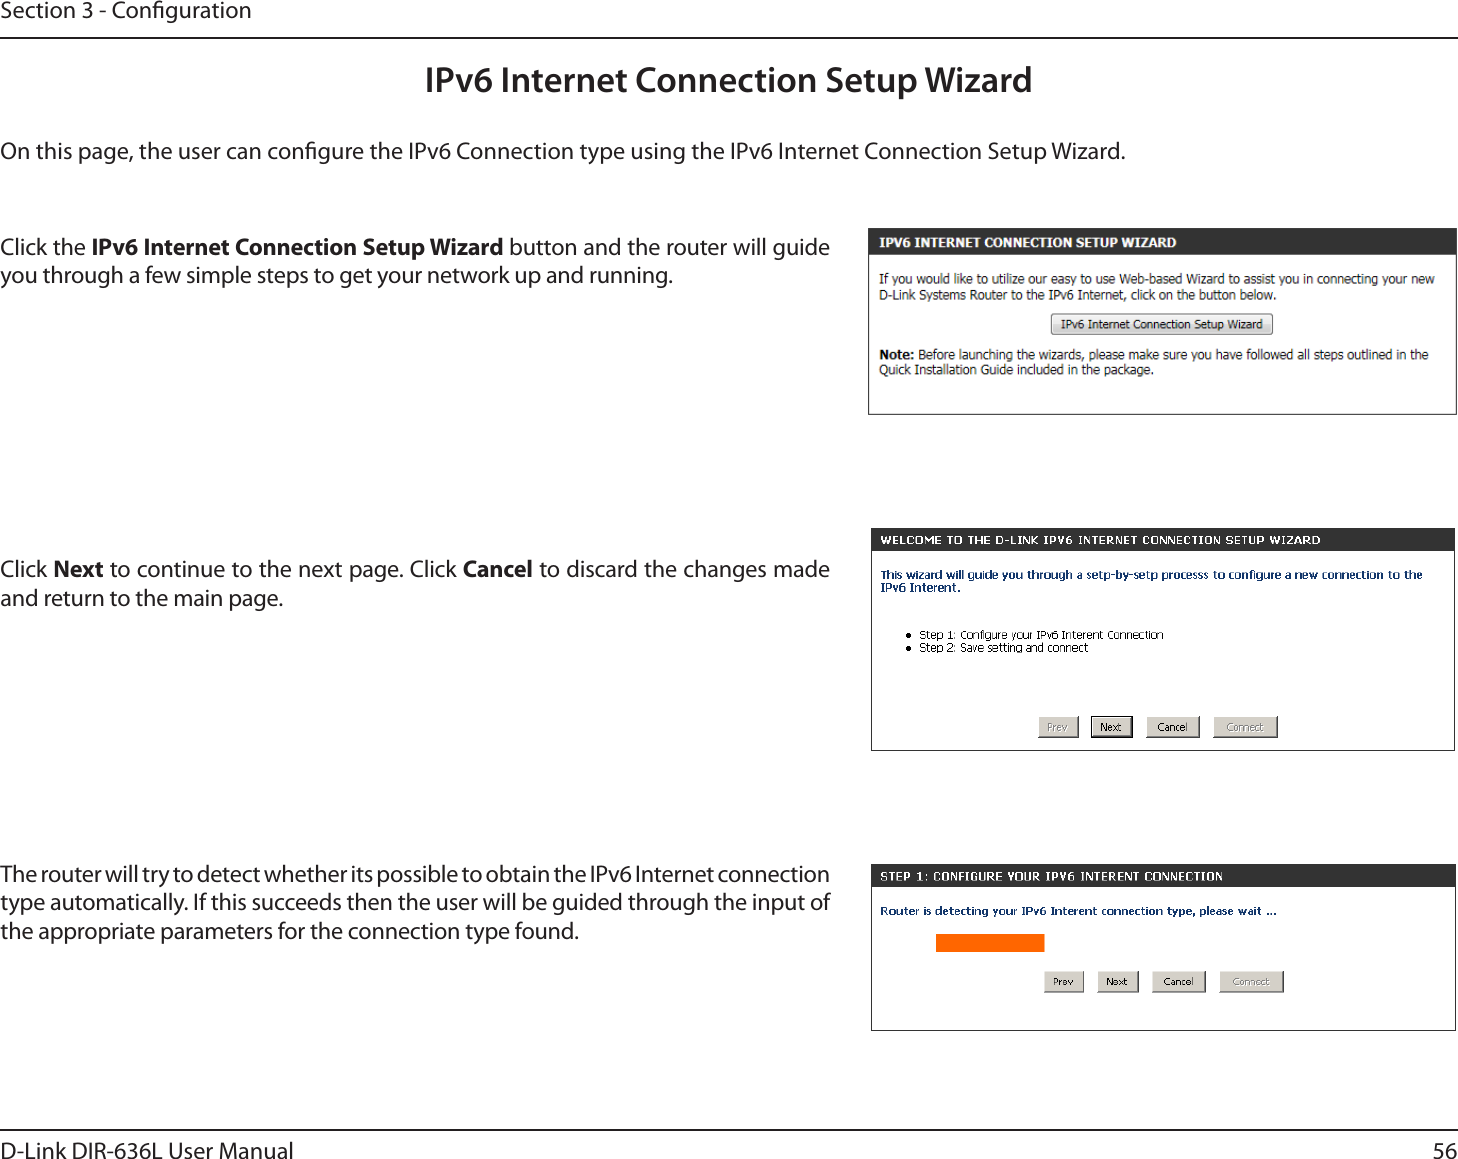 56D-Link DIR-636L User ManualSection 3 - CongurationIPv6 Internet Connection Setup WizardOn this page, the user can congure the IPv6 Connection type using the IPv6 Internet Connection Setup Wizard.Click the IPv6 Internet Connection Setup Wizard button and the router will guide you through a few simple steps to get your network up and running.Click Next to continue to the next page. Click Cancel to discard the changes made and return to the main page.The router will try to detect whether its possible to obtain the IPv6 Internet connection type automatically. If this succeeds then the user will be guided through the input of the appropriate parameters for the connection type found.